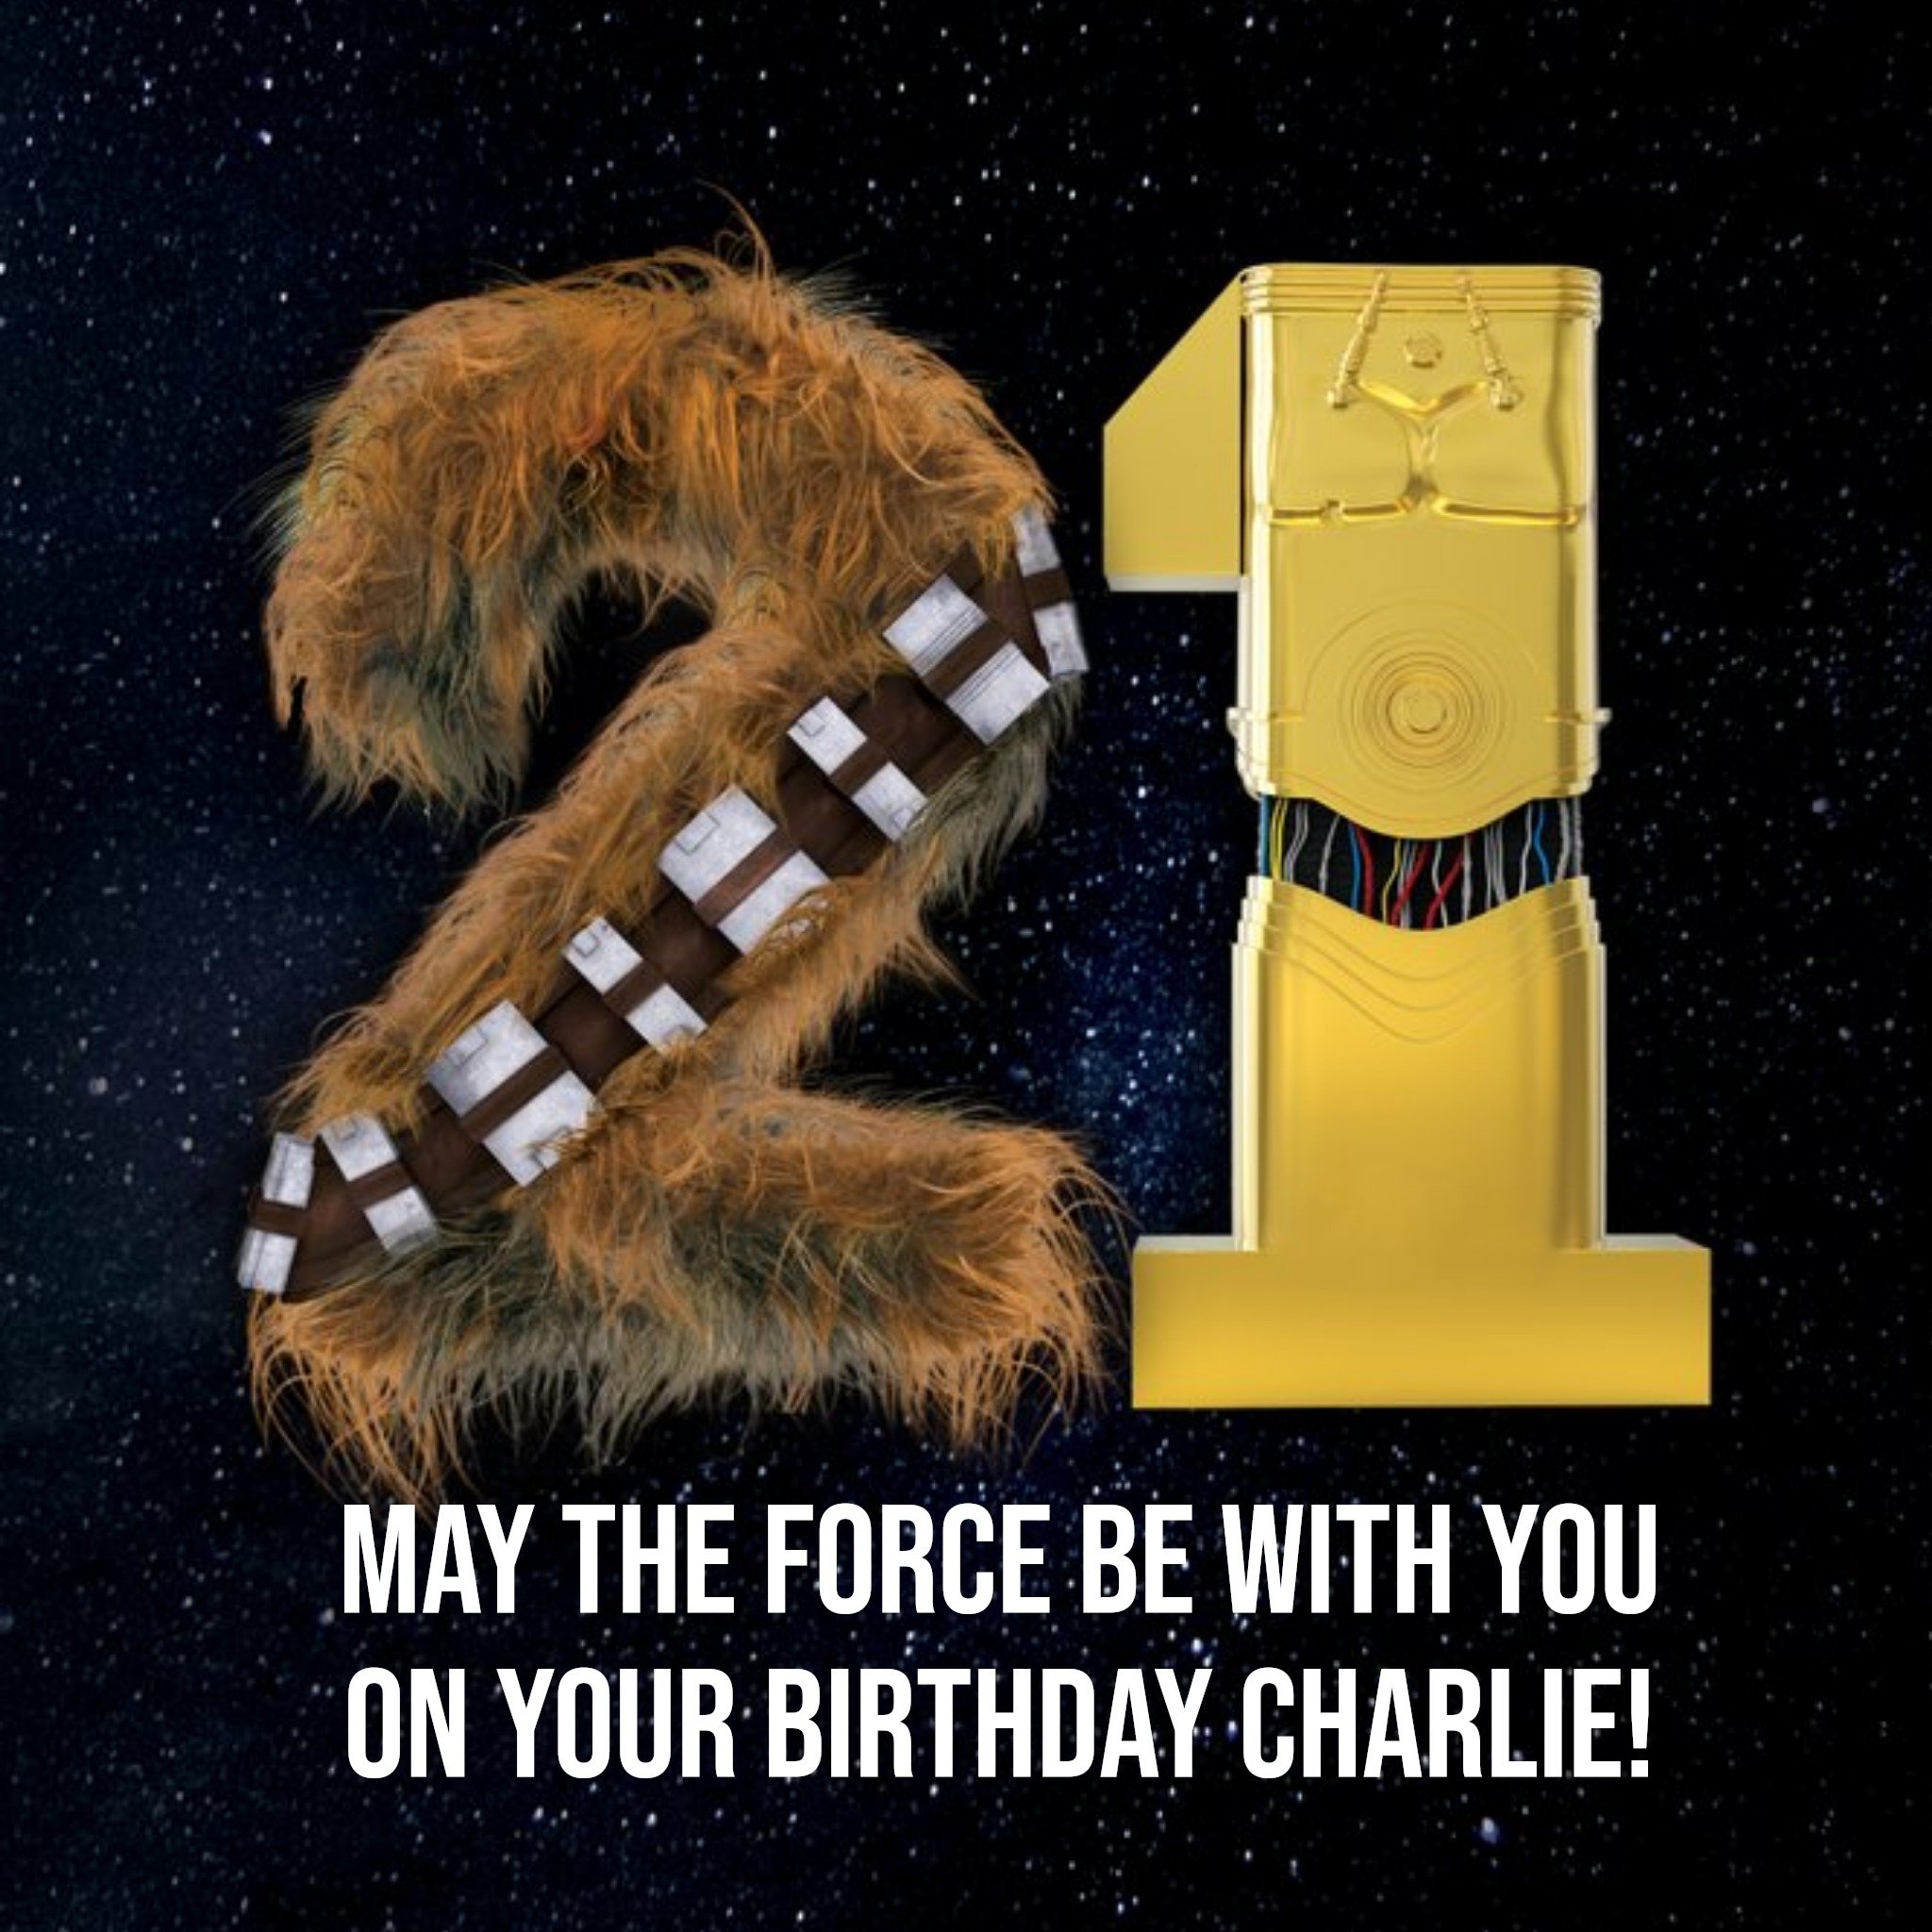 Disney star Wars May The Force Be With You 21st Birthday Card, Large